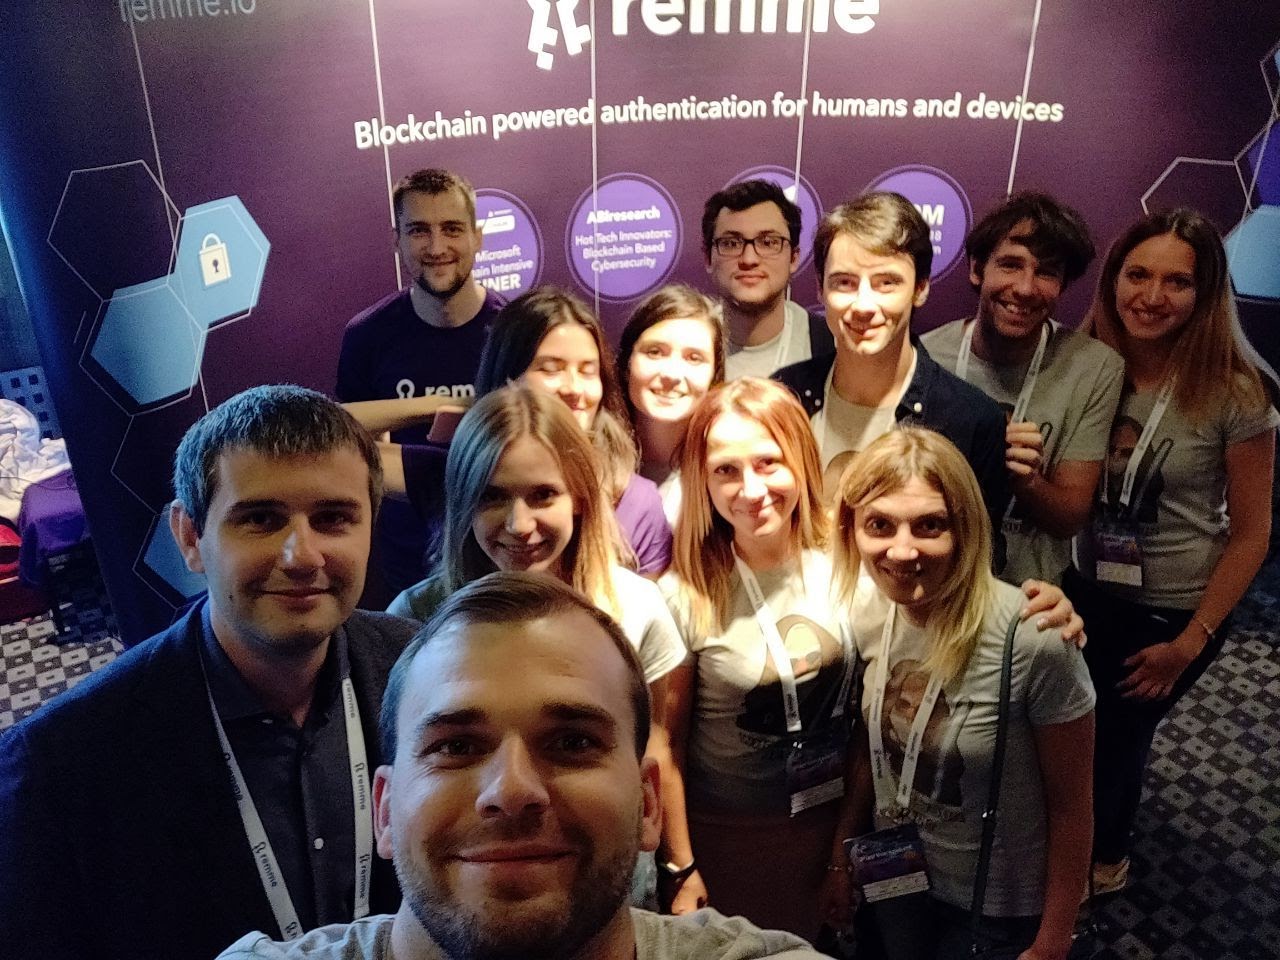 The Remme team in action at a conference.